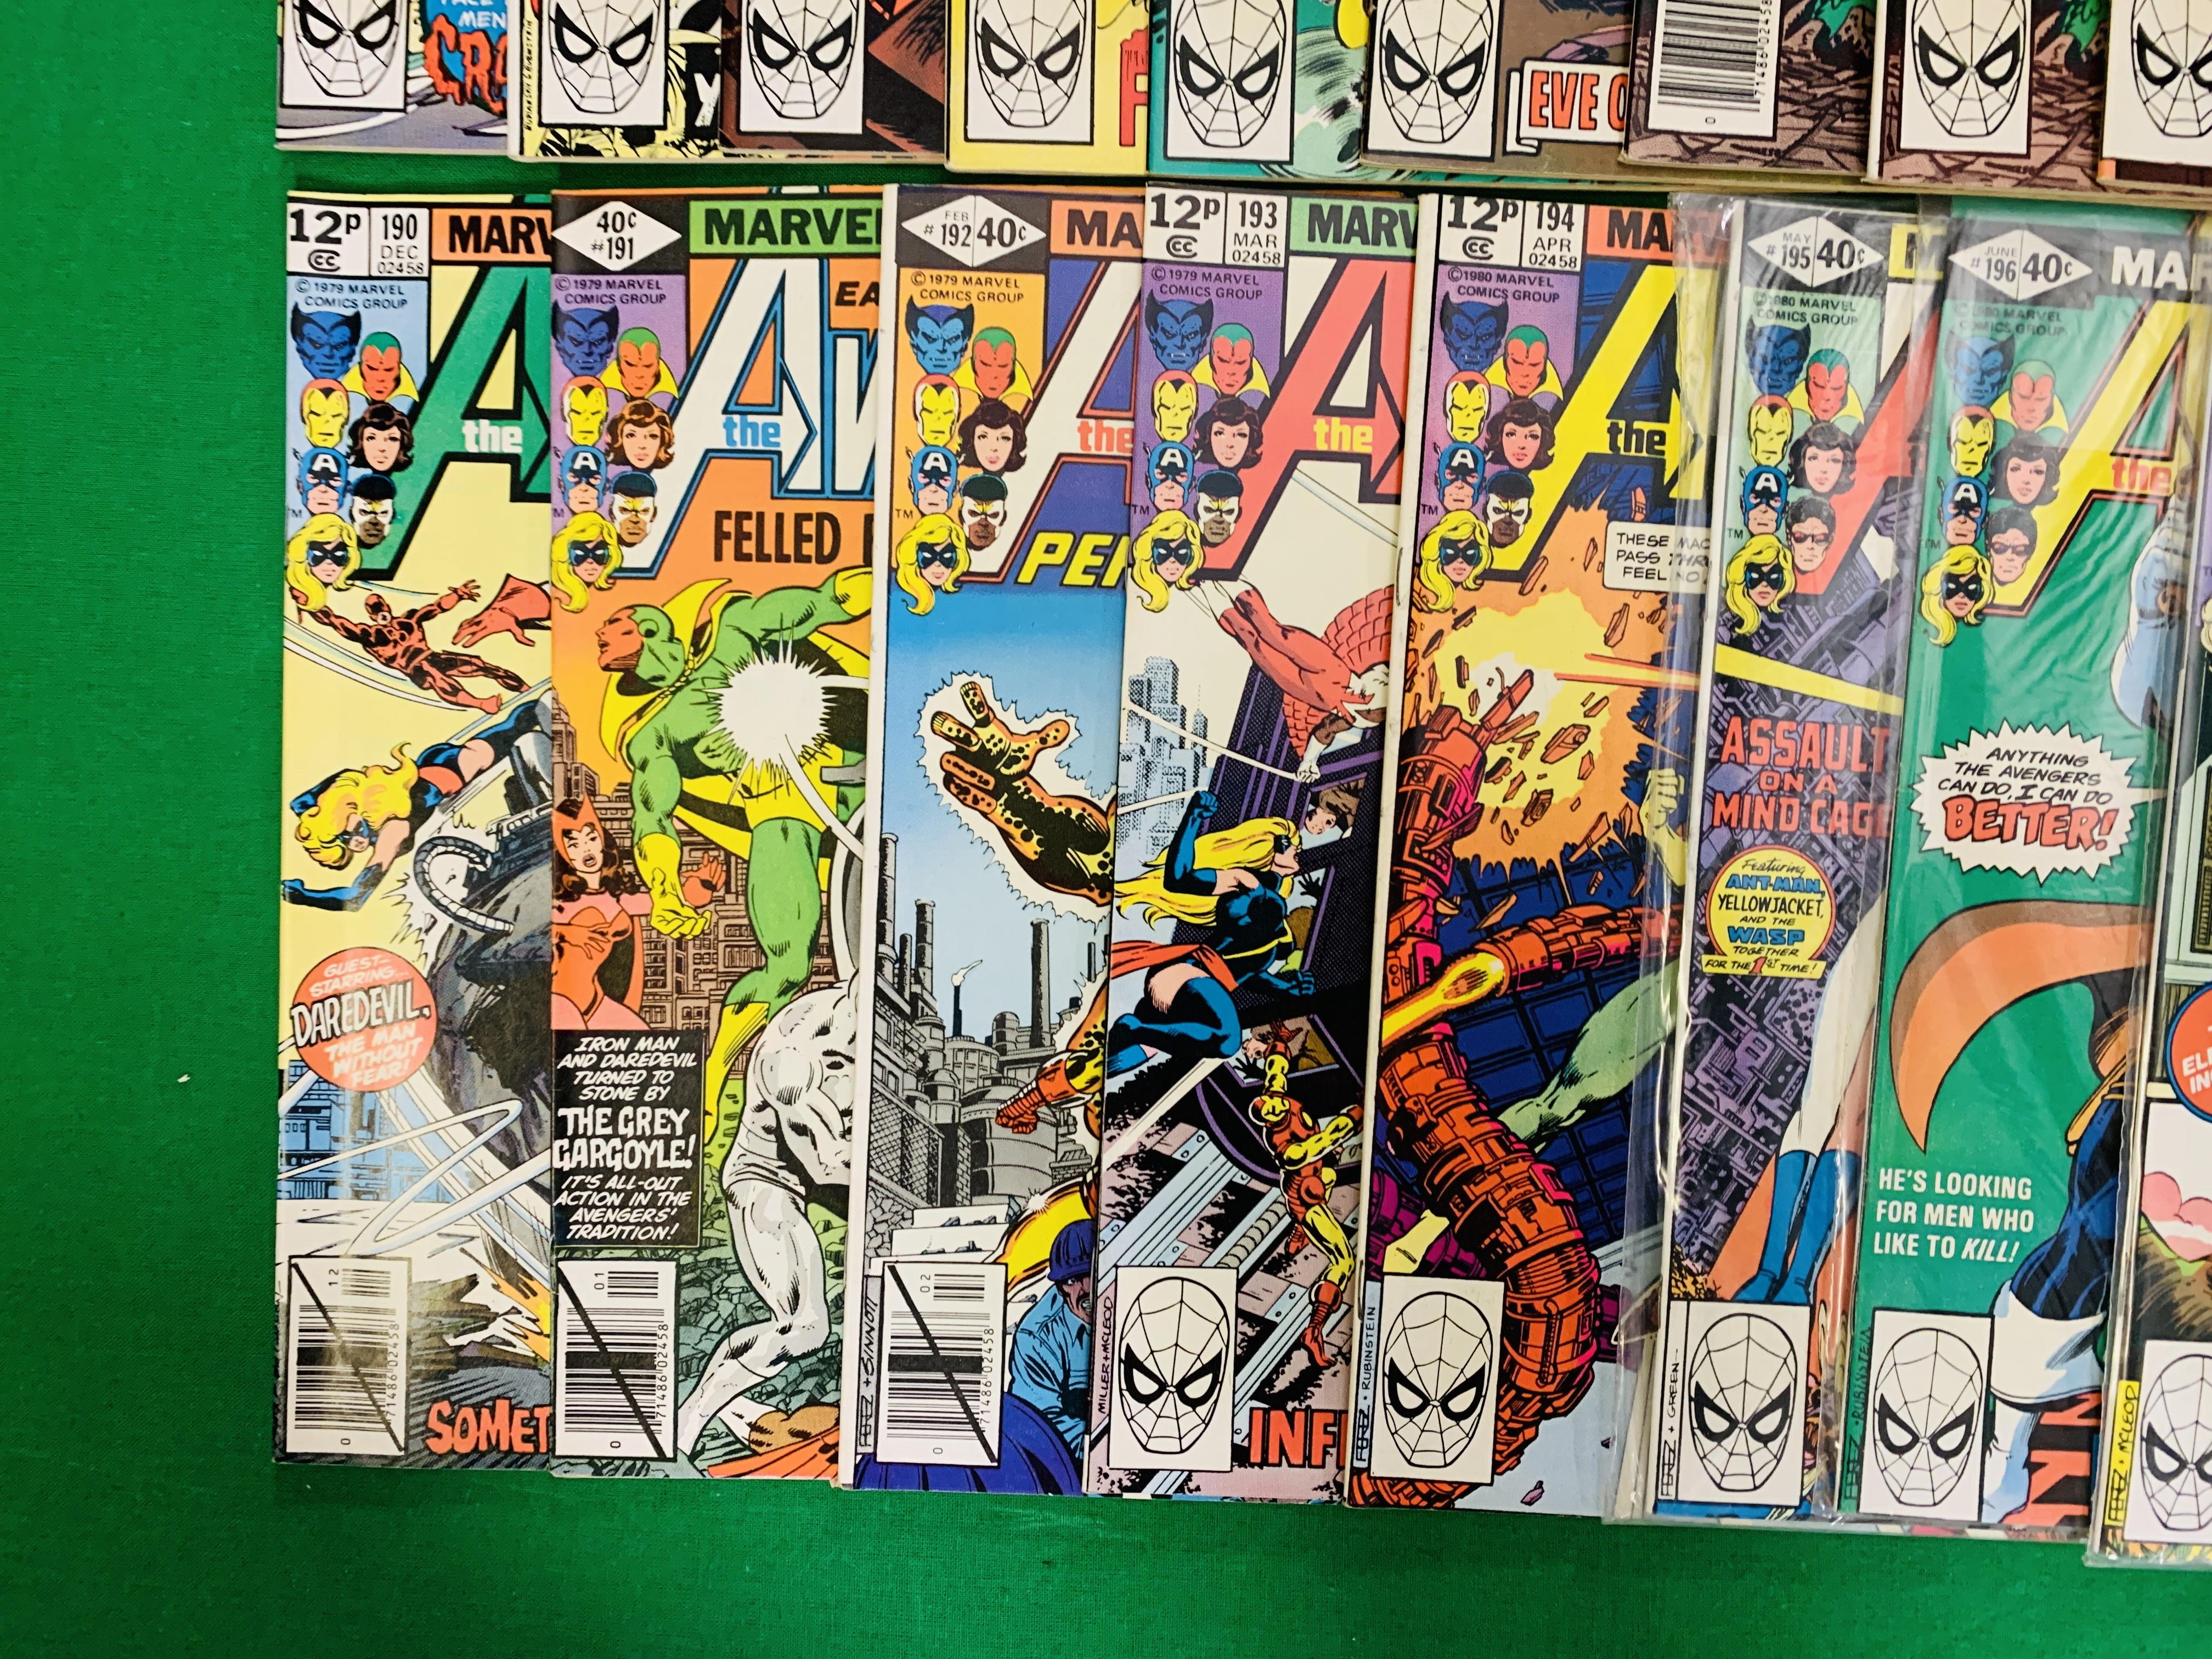 MARVEL COMICS THE AVENGERS NO. 101 - 299, MISSING ISSUES 103 AND 110. - Image 105 of 130